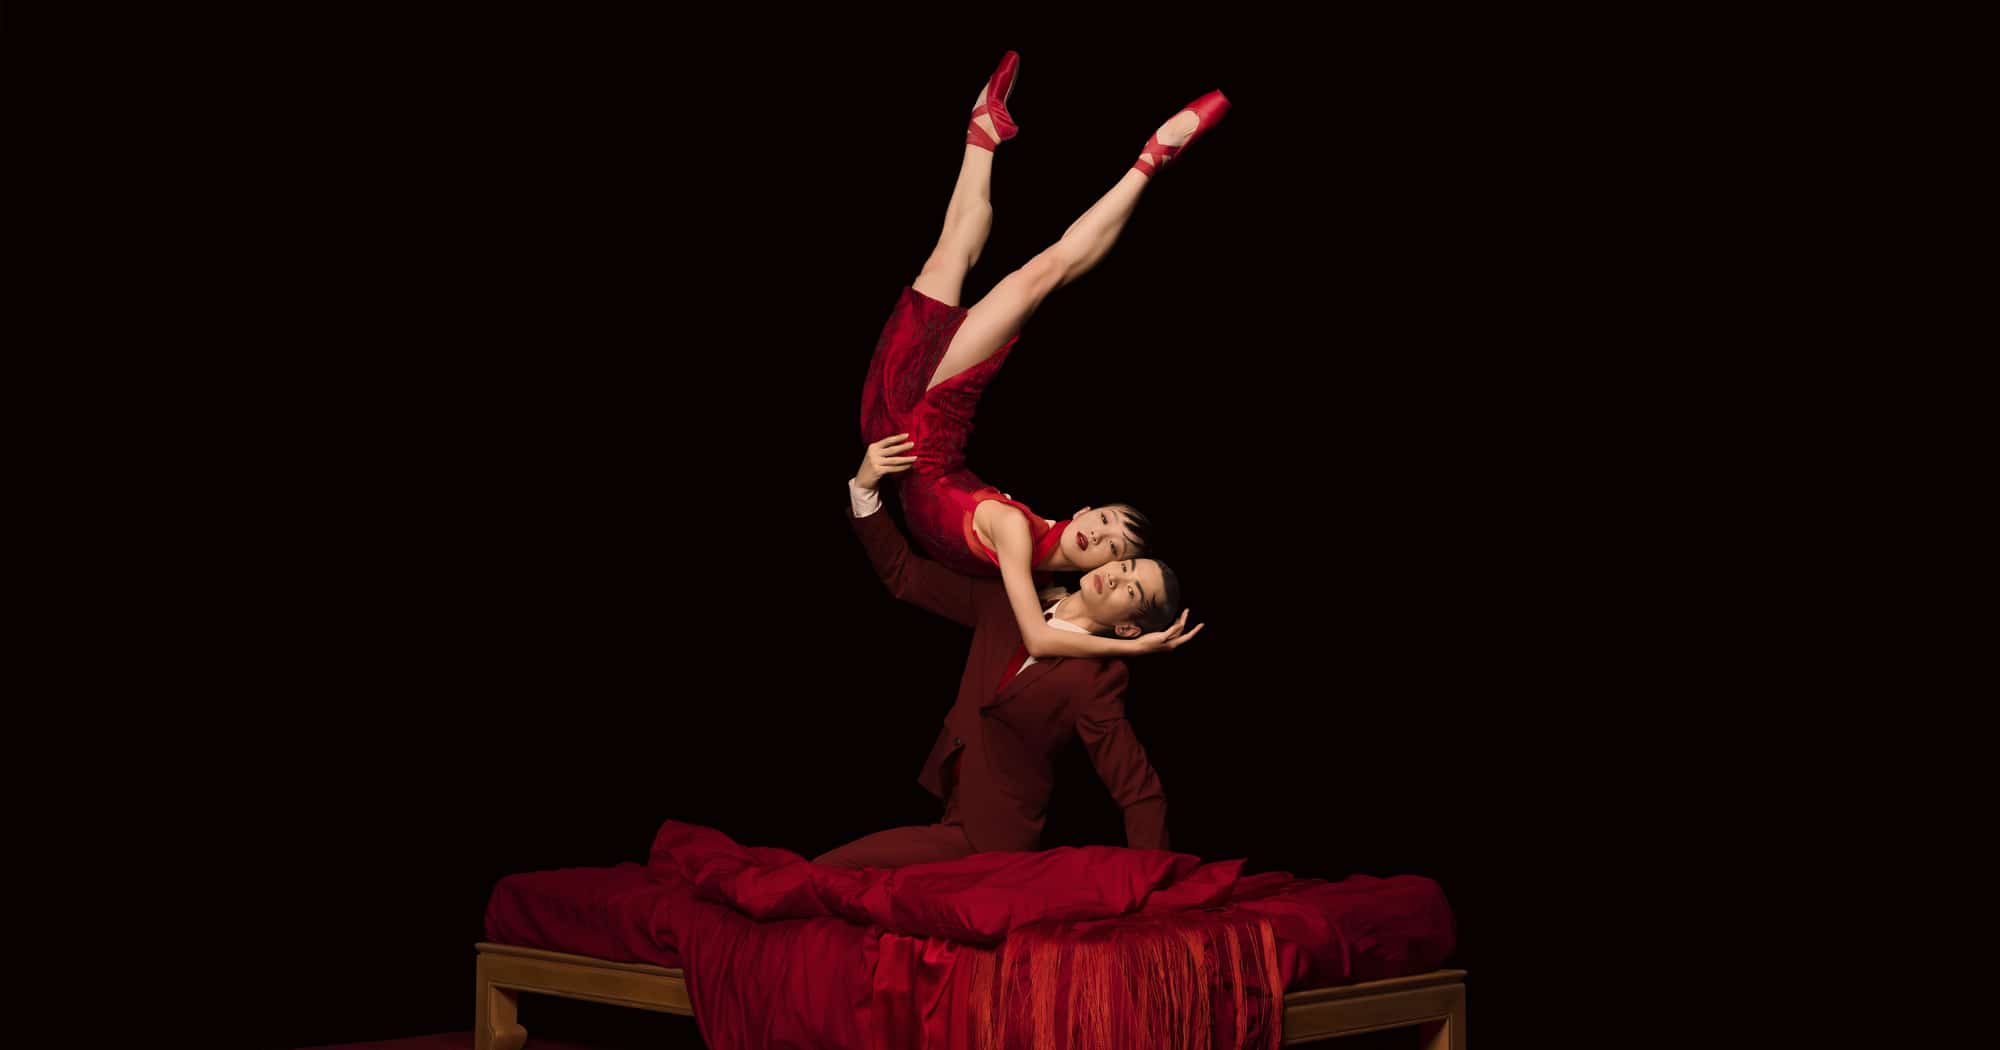 Two dancers from the Hong Kong Ballet perform on a red bed